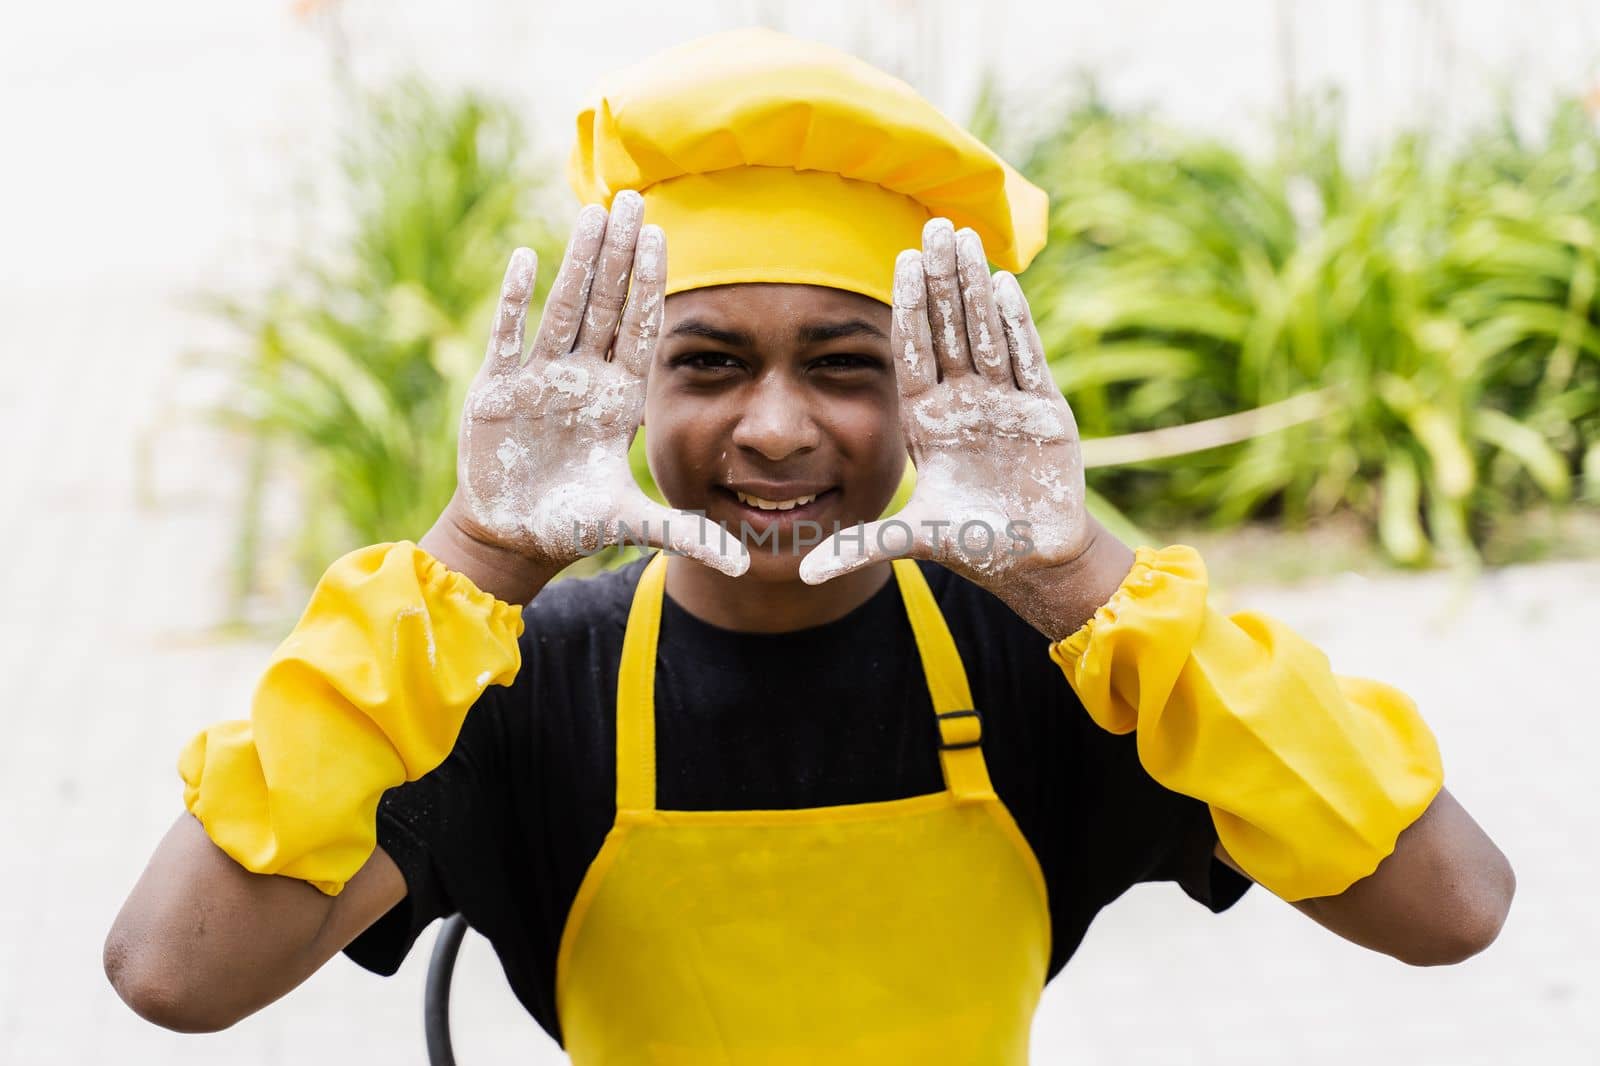 Black african cook teenager showing hands with flour and smiling. African child in chefs hat and yellow apron uniform